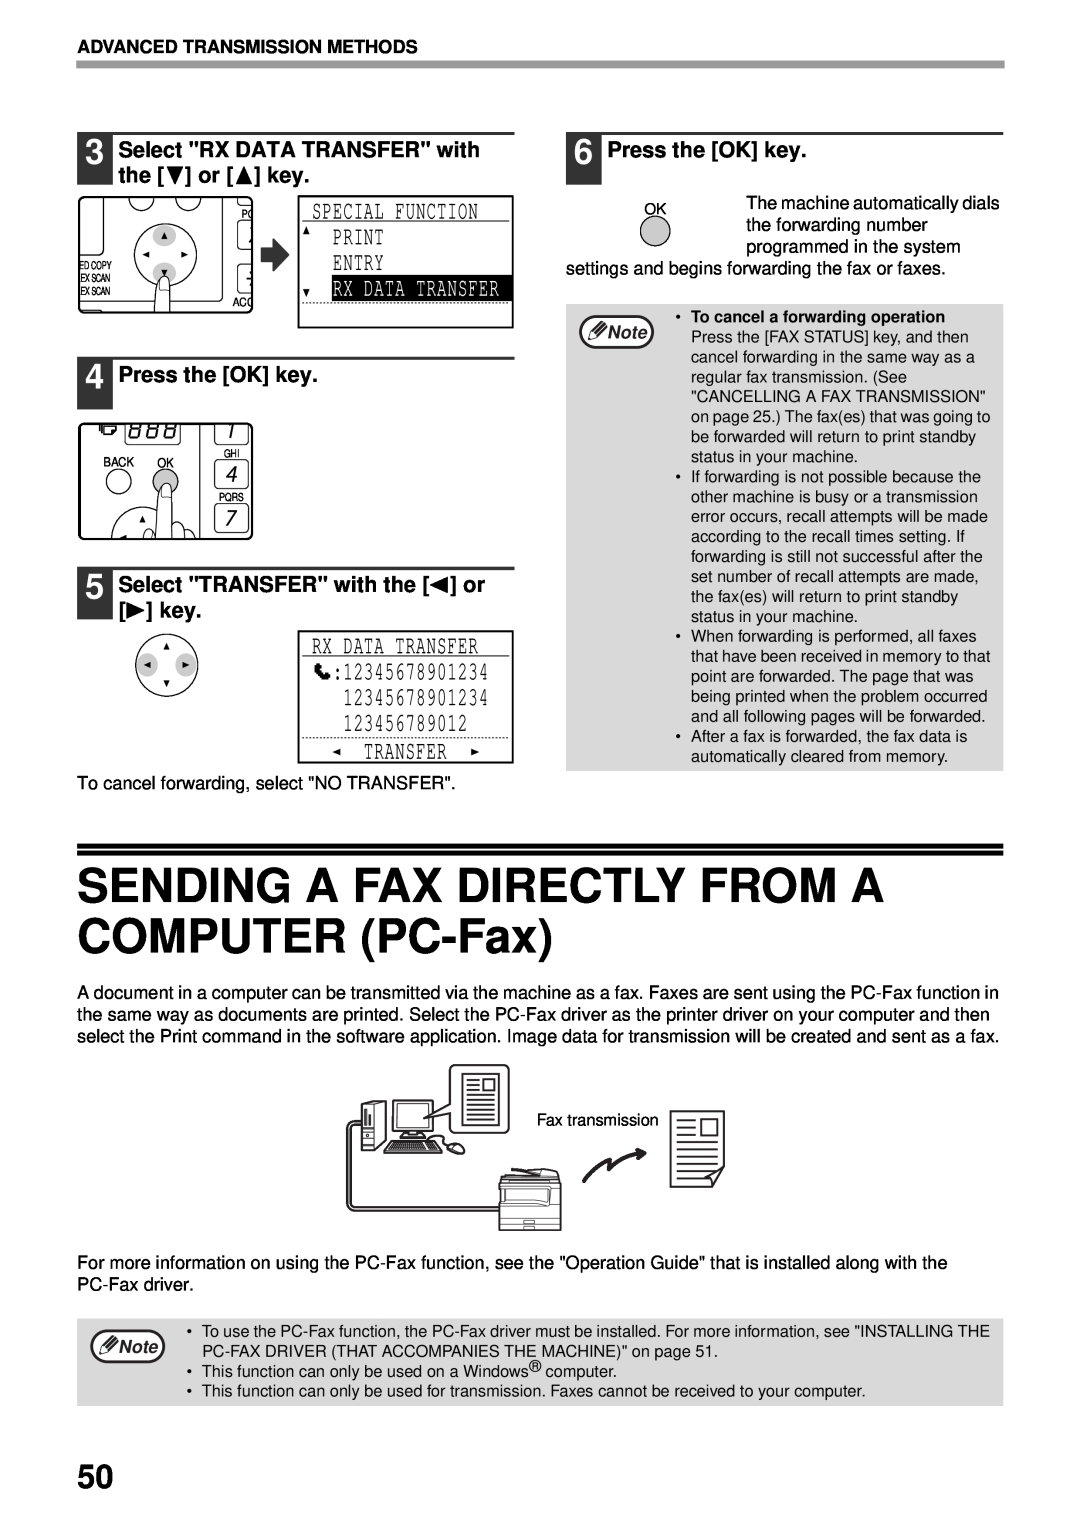 Sharp MX-FX13 SENDING A FAX DIRECTLY FROM A COMPUTER PC-Fax, Select RX DATA TRANSFER with the or key, Press the OK key 